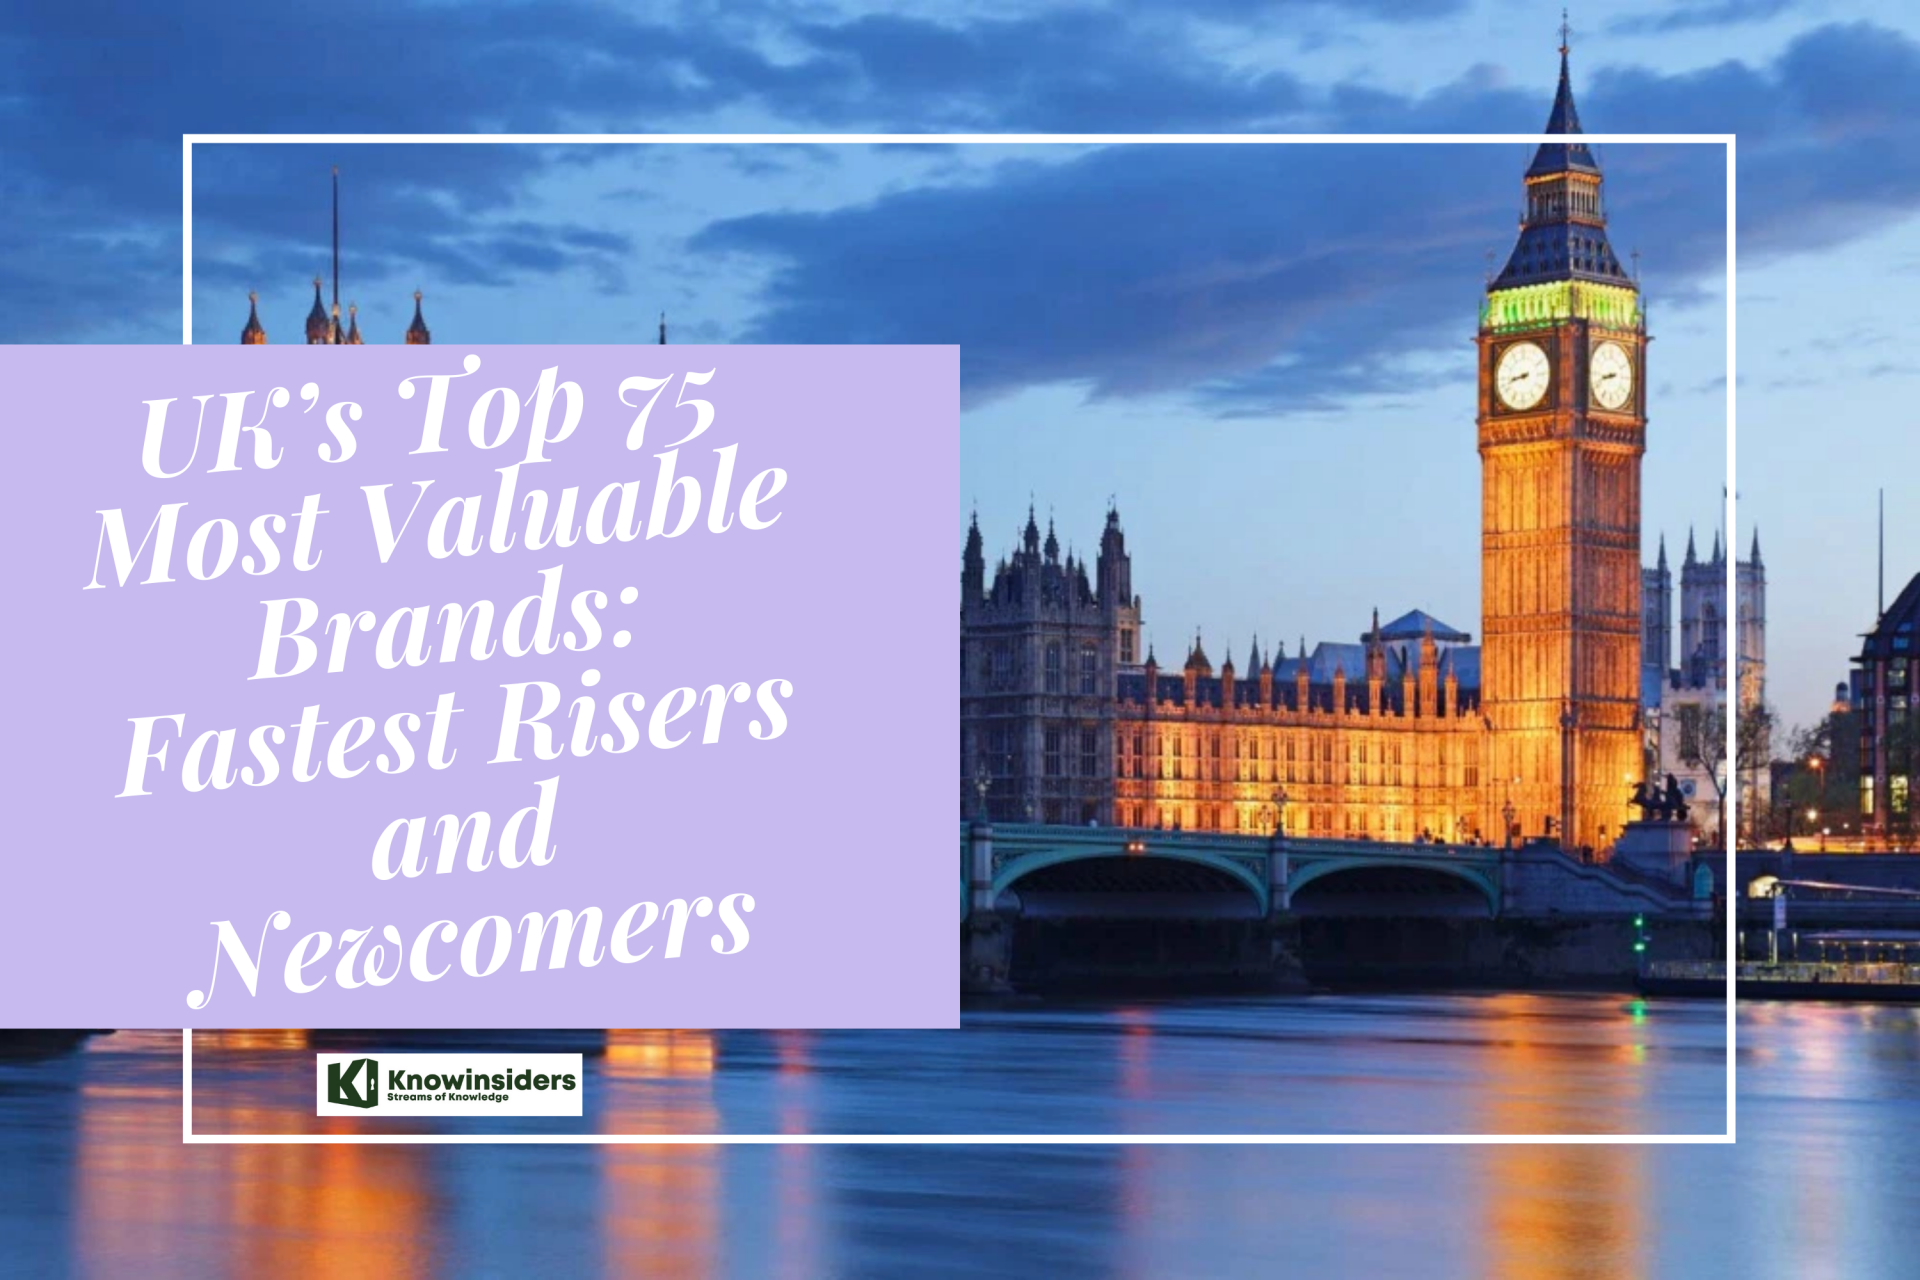 UK’s Top 75 Most Valuable Brands: Fastest Risers and Newcomers